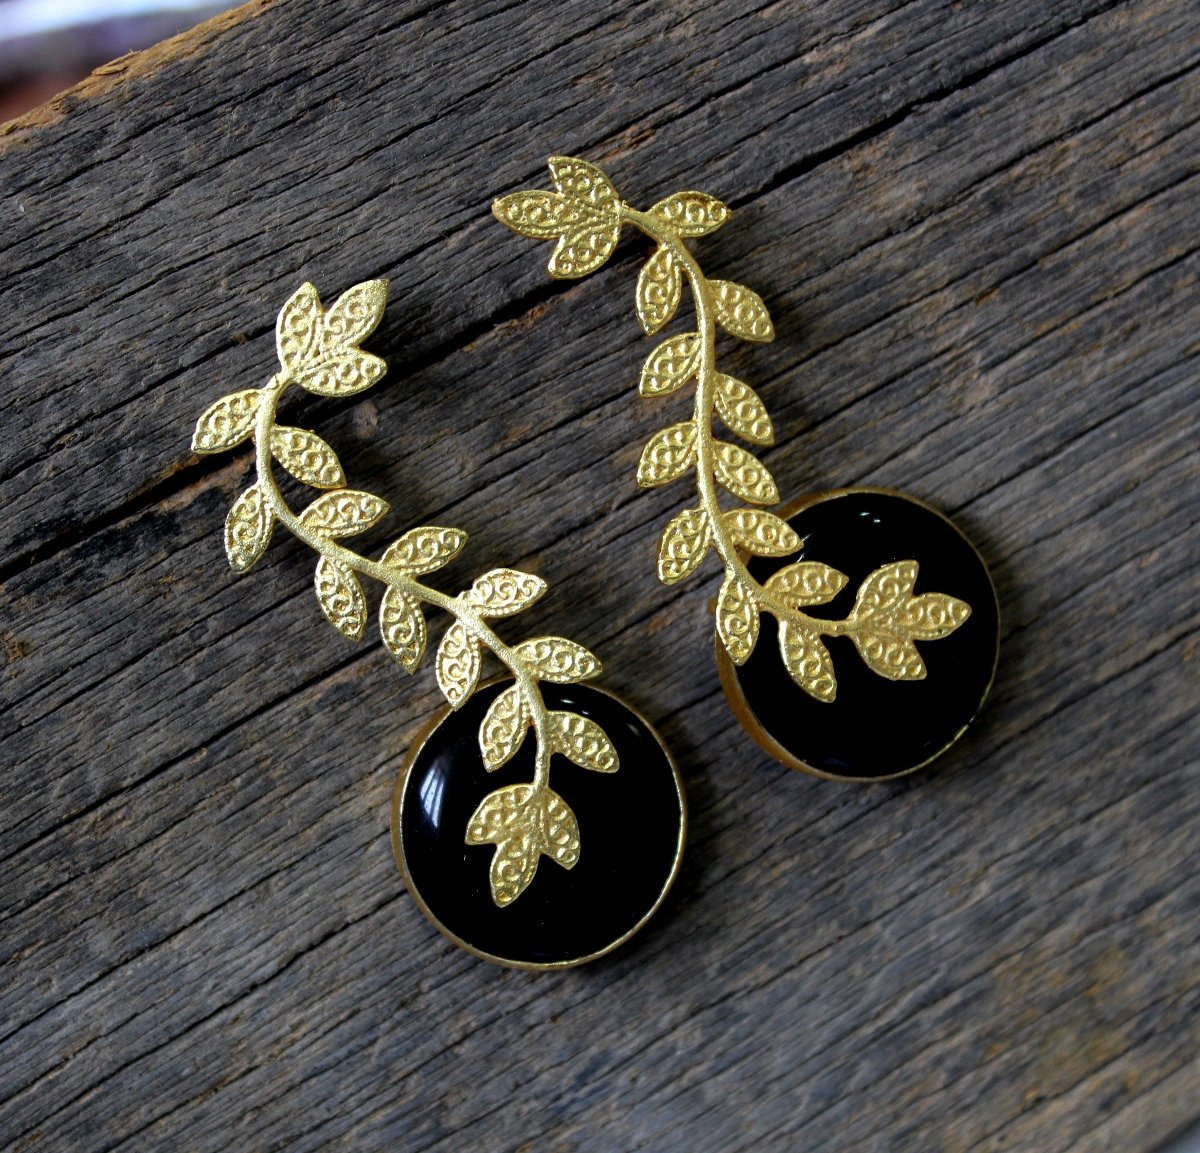 ExquisiteJewelsnGems vine and black circle earrings